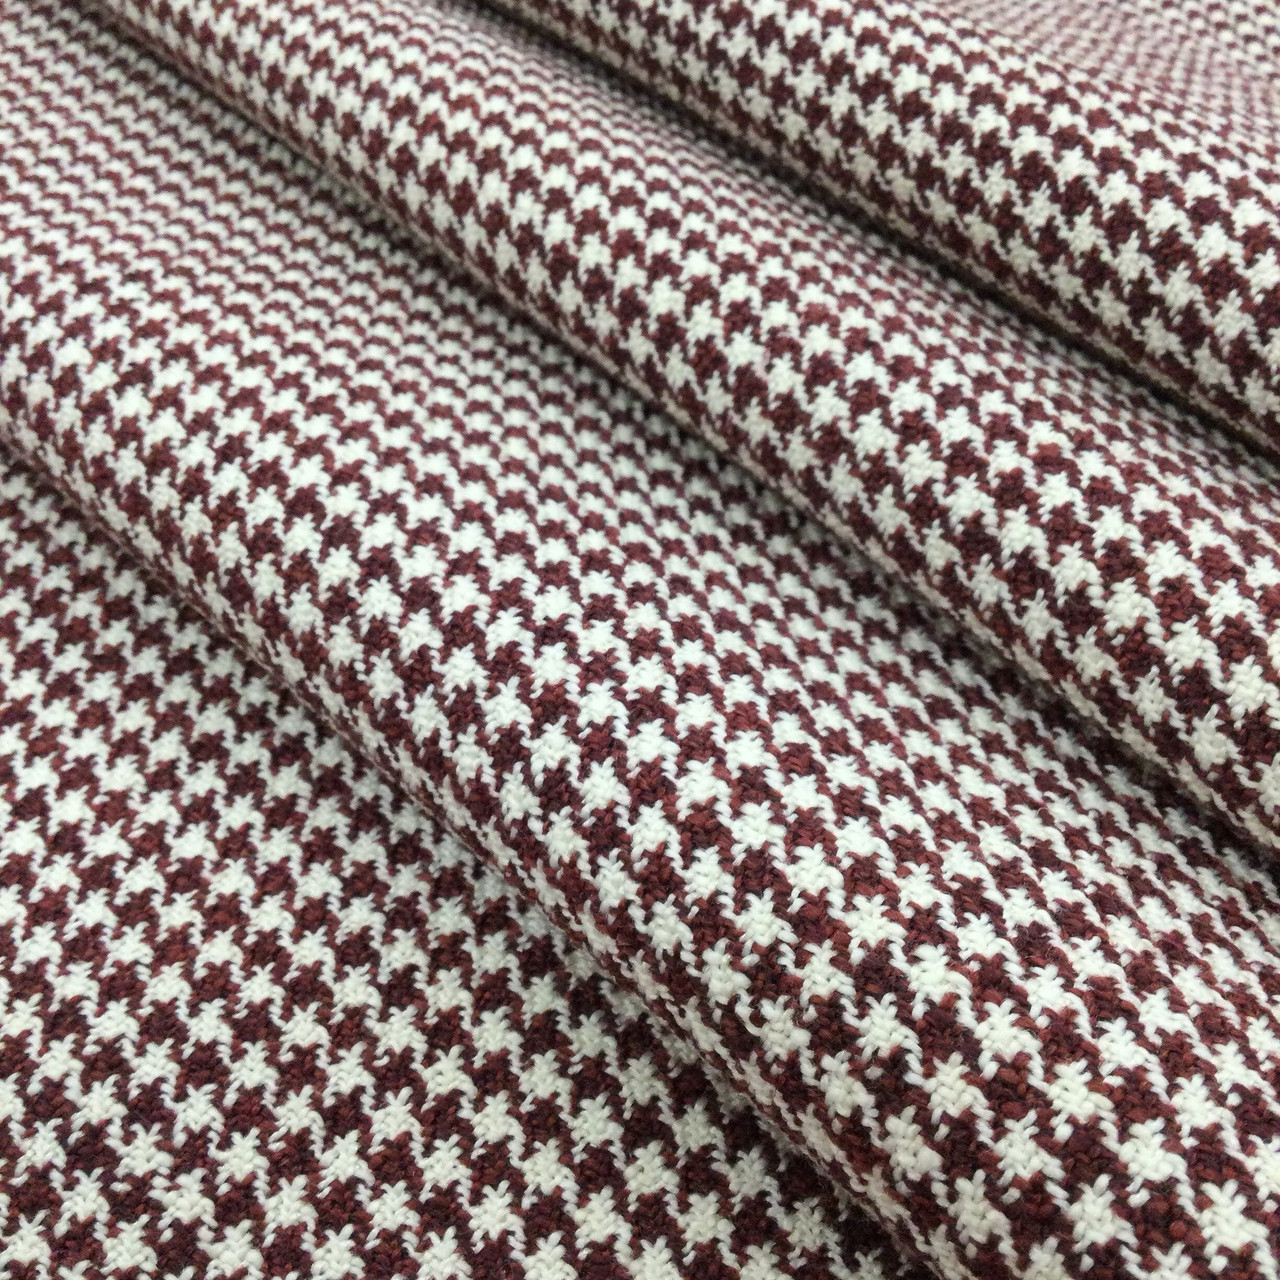 Dark Red and White Houndstooth Fabric, Upholstery